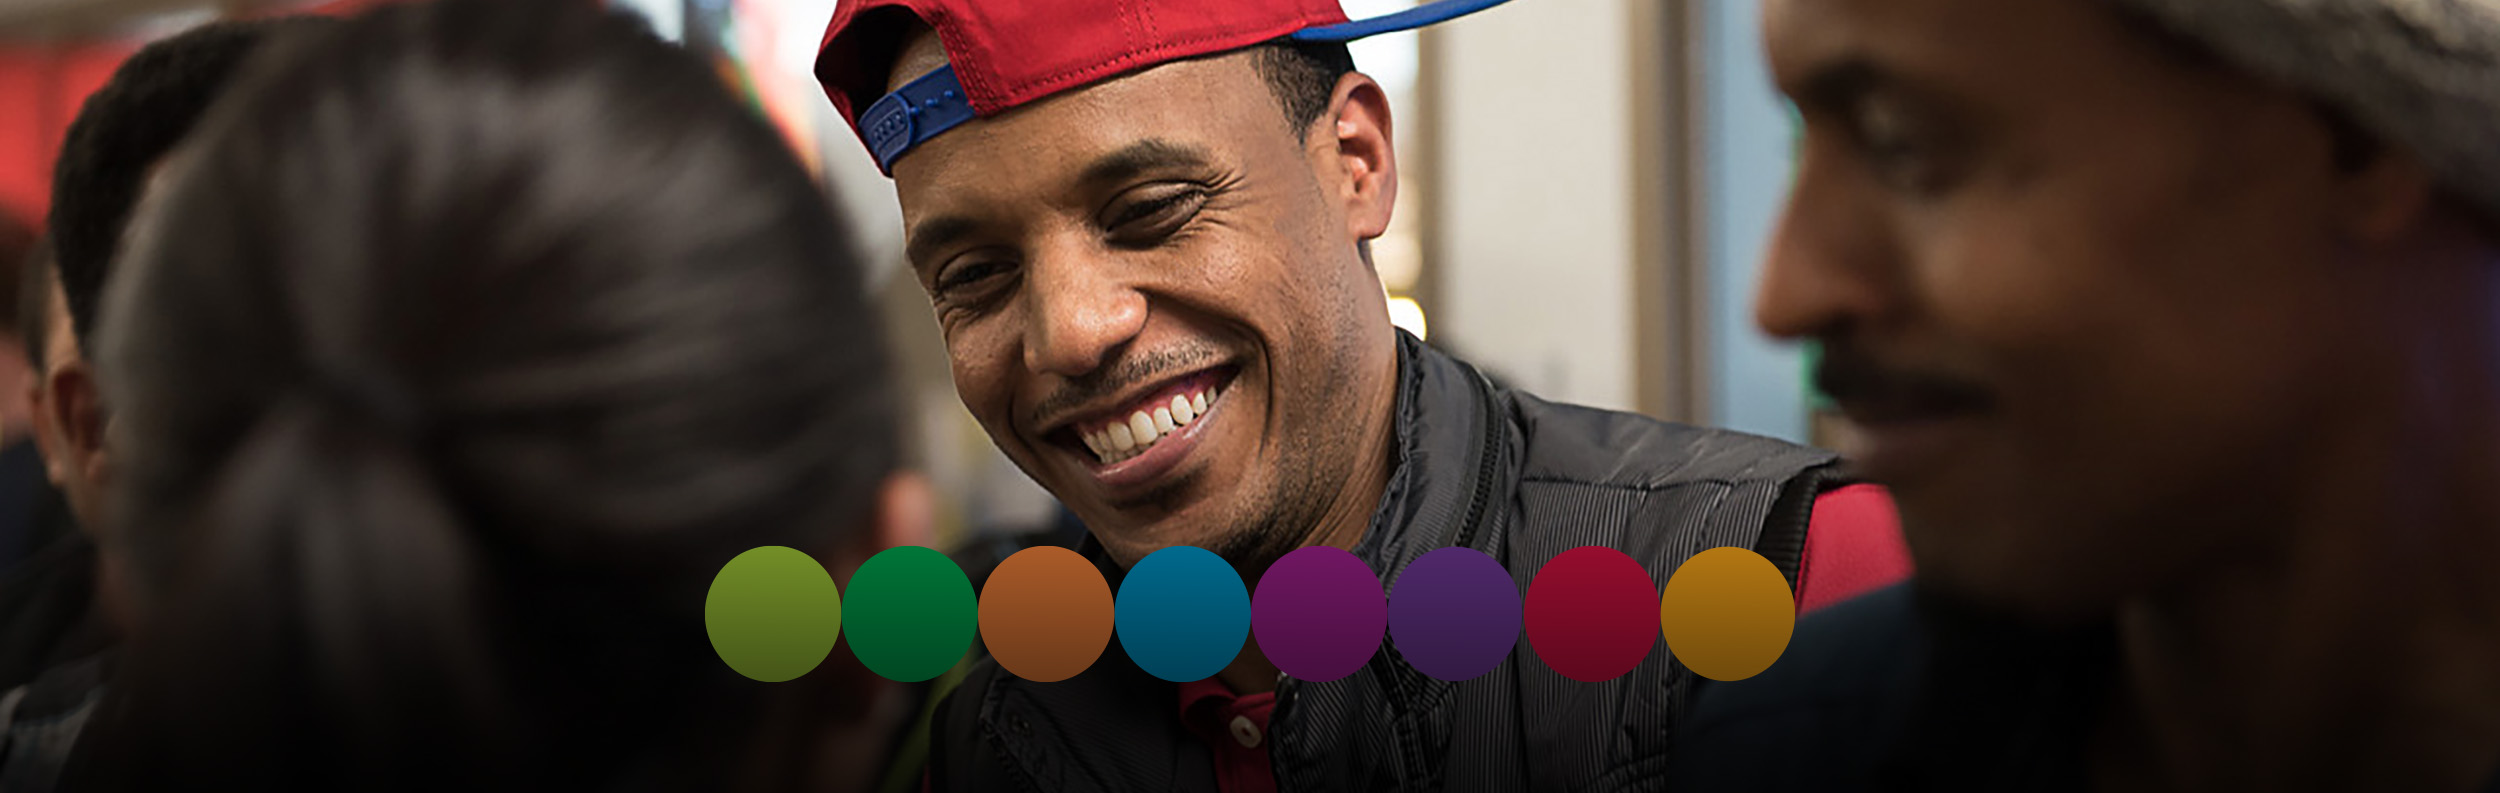  Photo of student smiling with a red backwards baseball cap on 